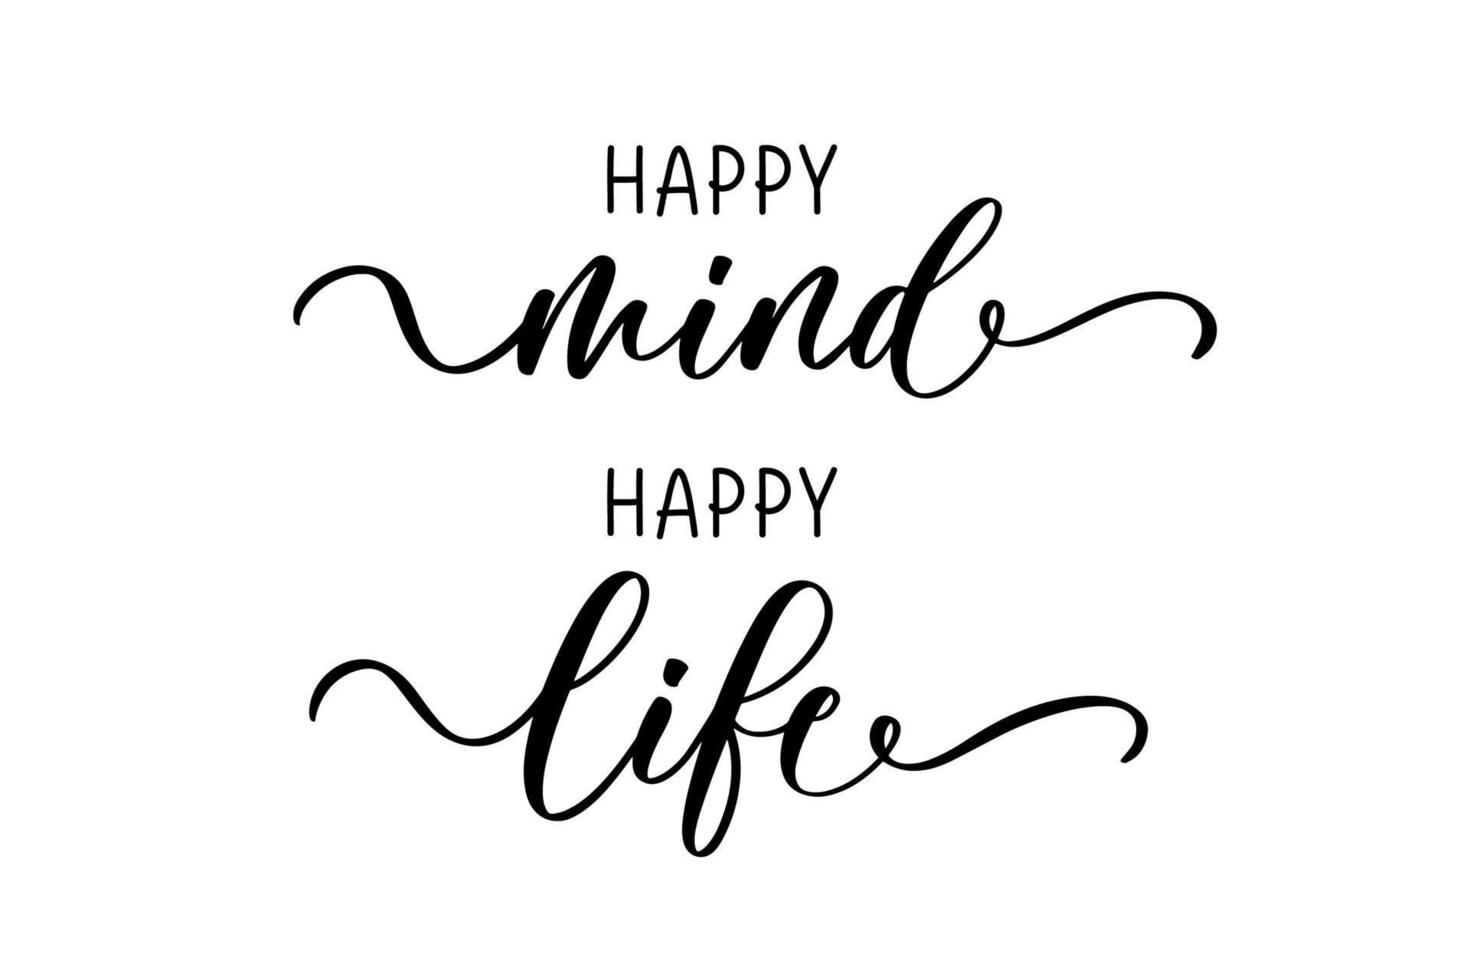 Happy mind, happy life. Positive saying phrase about happiness and lifestyle. vector